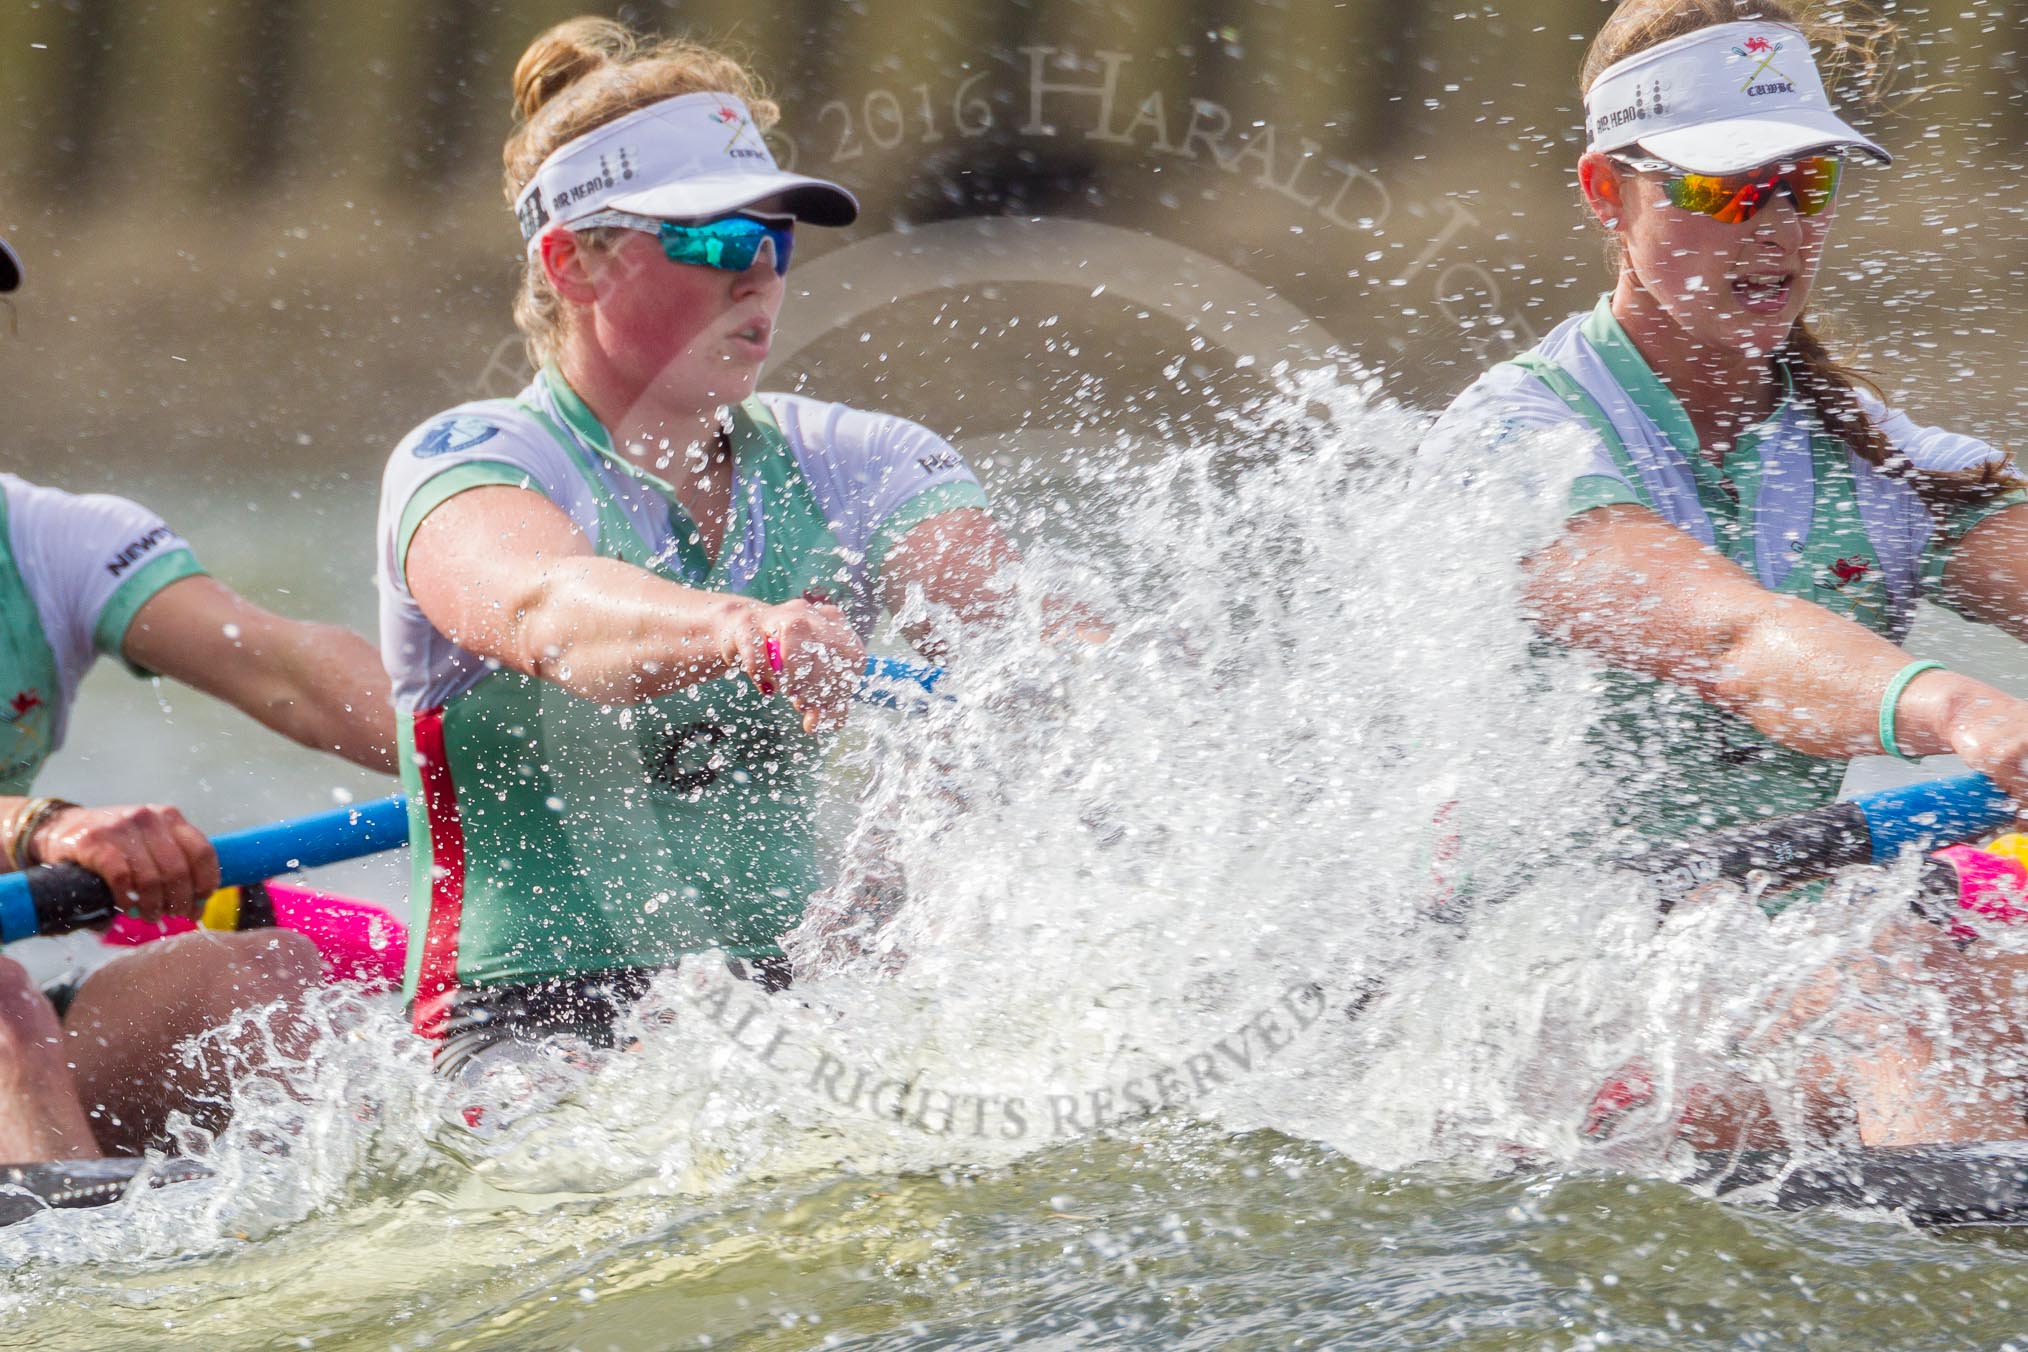 The Boat Race season 2016 -  The Cancer Research Women's Boat Race.
River Thames between Putney Bridge and Mortlake,
London SW15,

United Kingdom,
on 27 March 2016 at 14:20, image #239